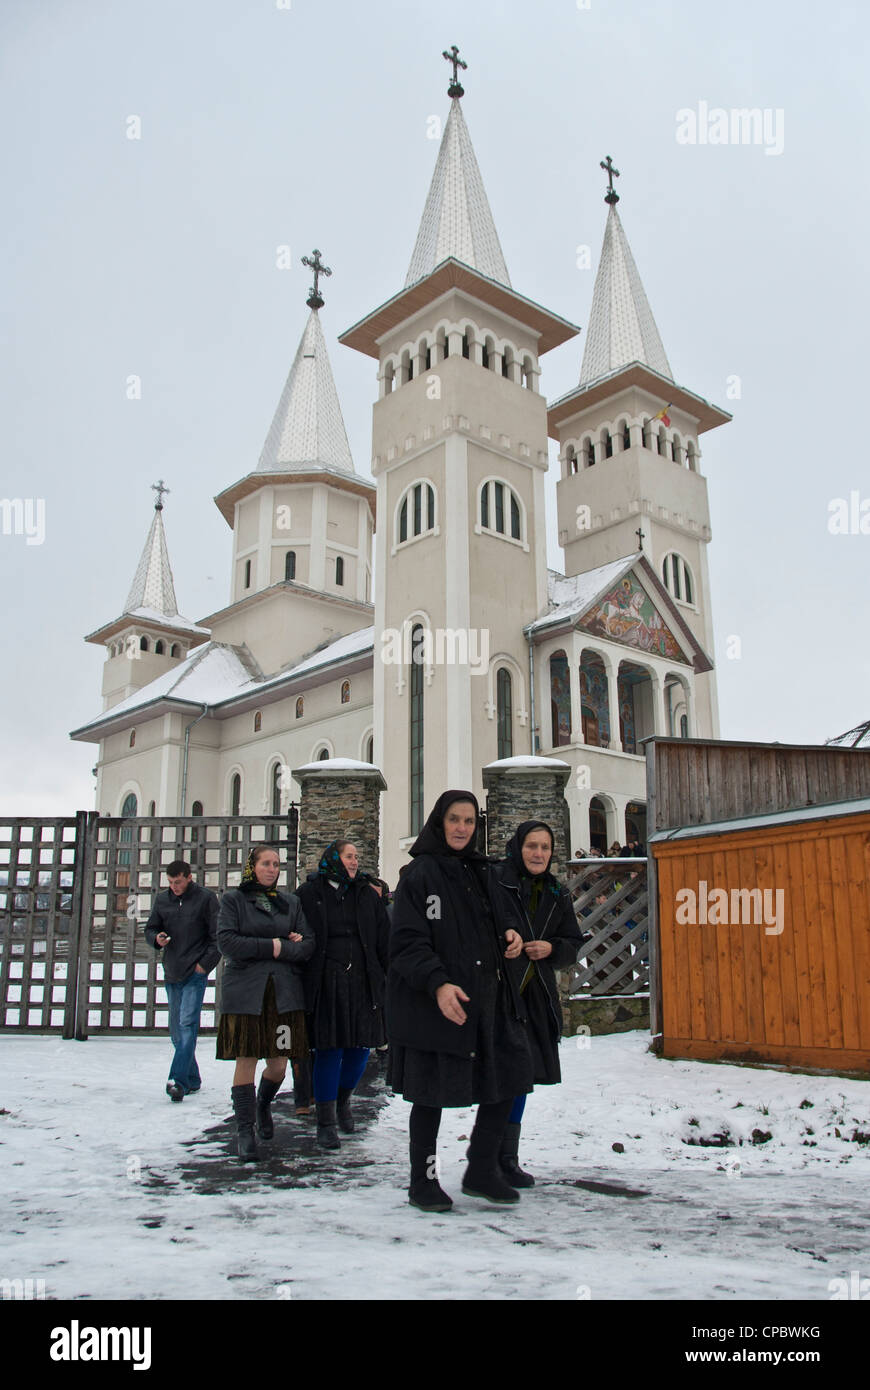 Local women coming out of the Church, Maramures, Romania Stock Photo